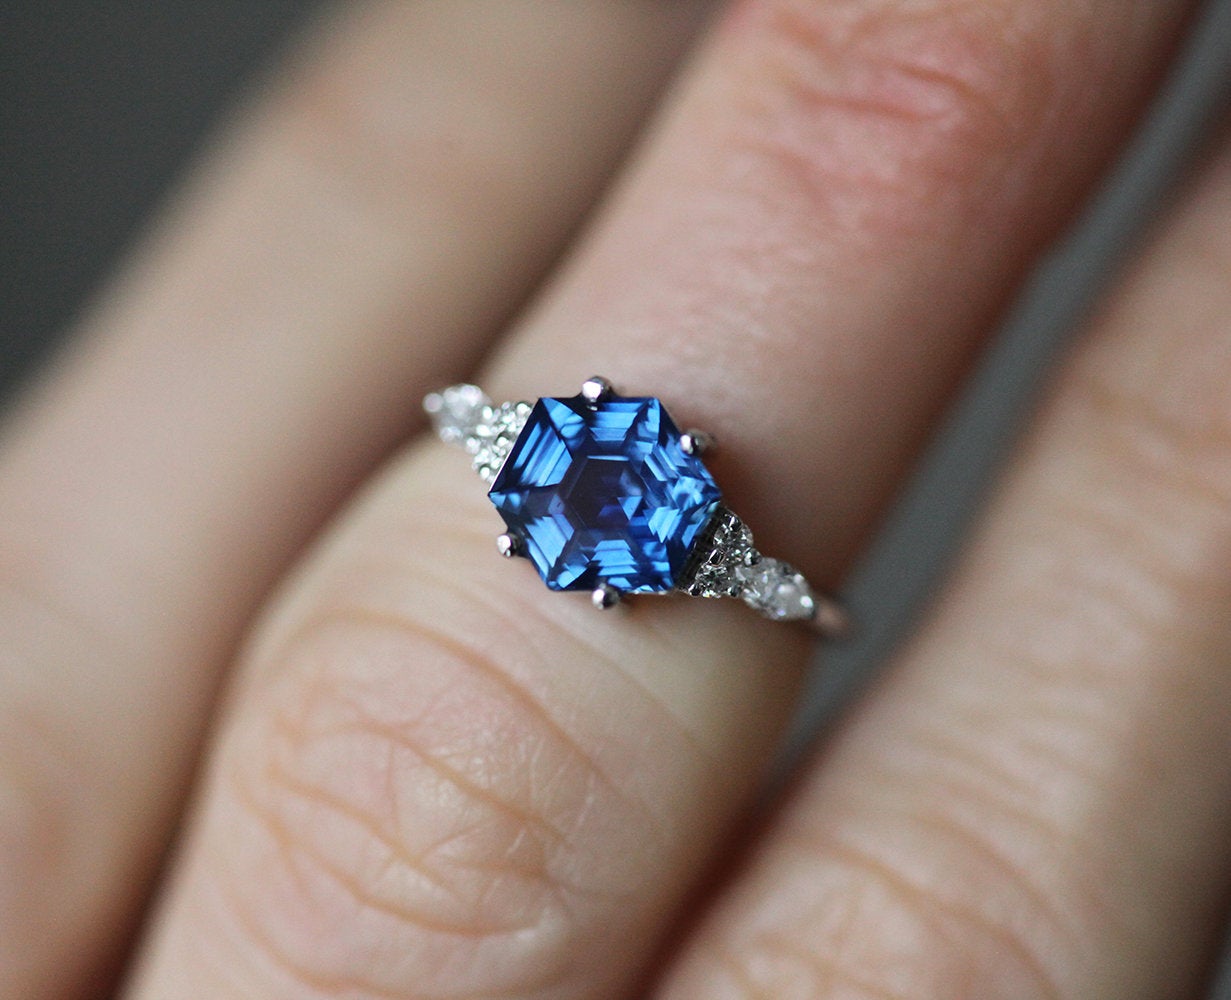 Blue hexagon-shaped sapphire ring with side diamonds